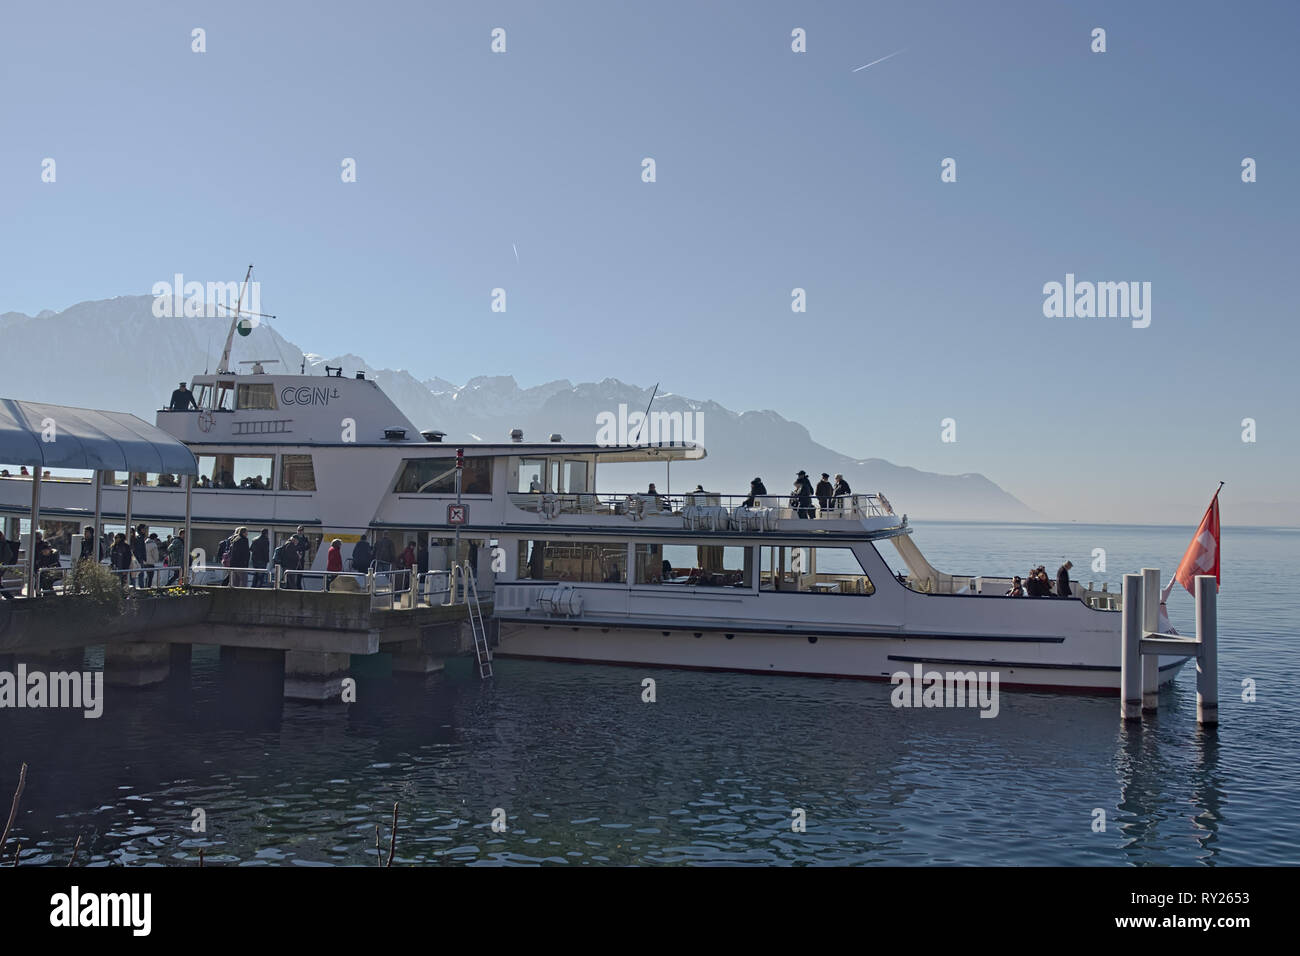 Montreux, Switzerland - 02 17, 2019: Transport ship anchored in montreux embarking passengers. Stock Photo